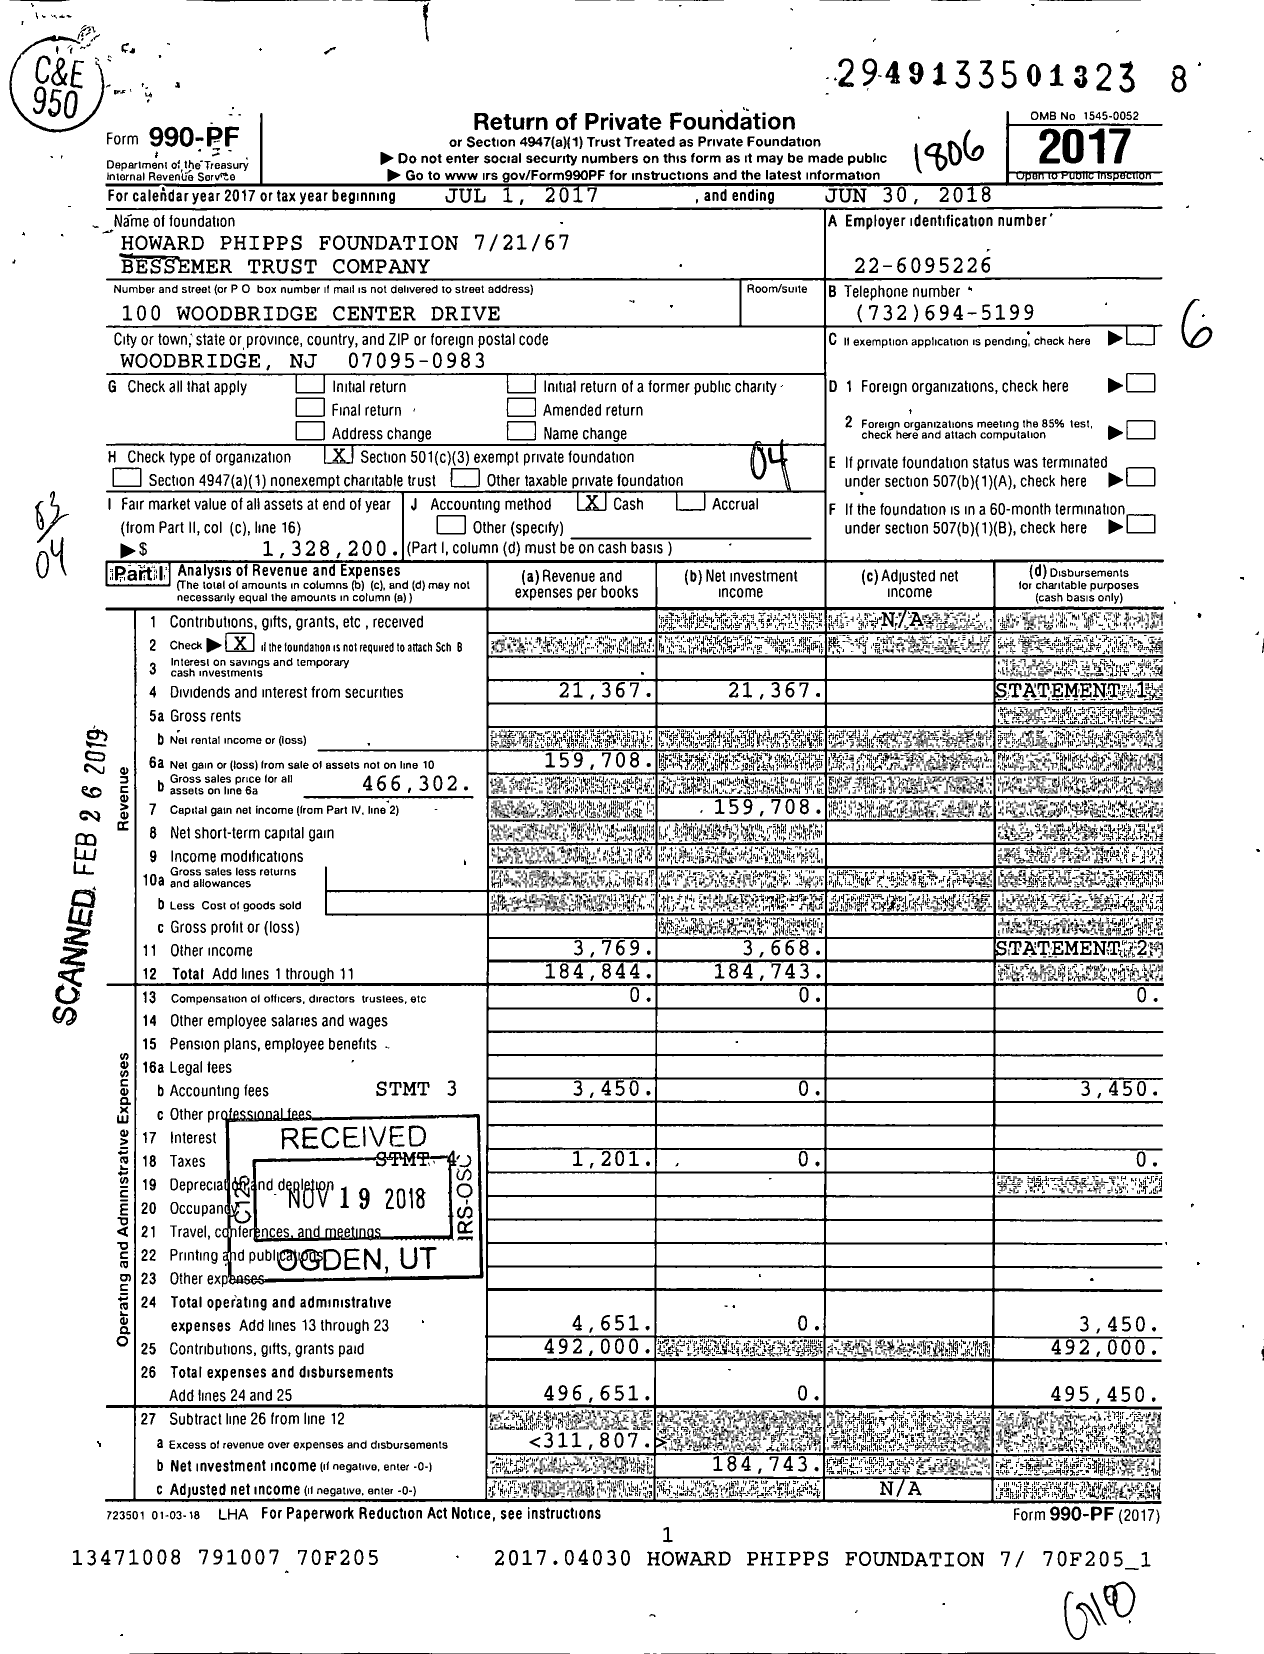 Image of first page of 2017 Form 990PF for Howard Phipps Foundation 72167 Bessemer Trust Company